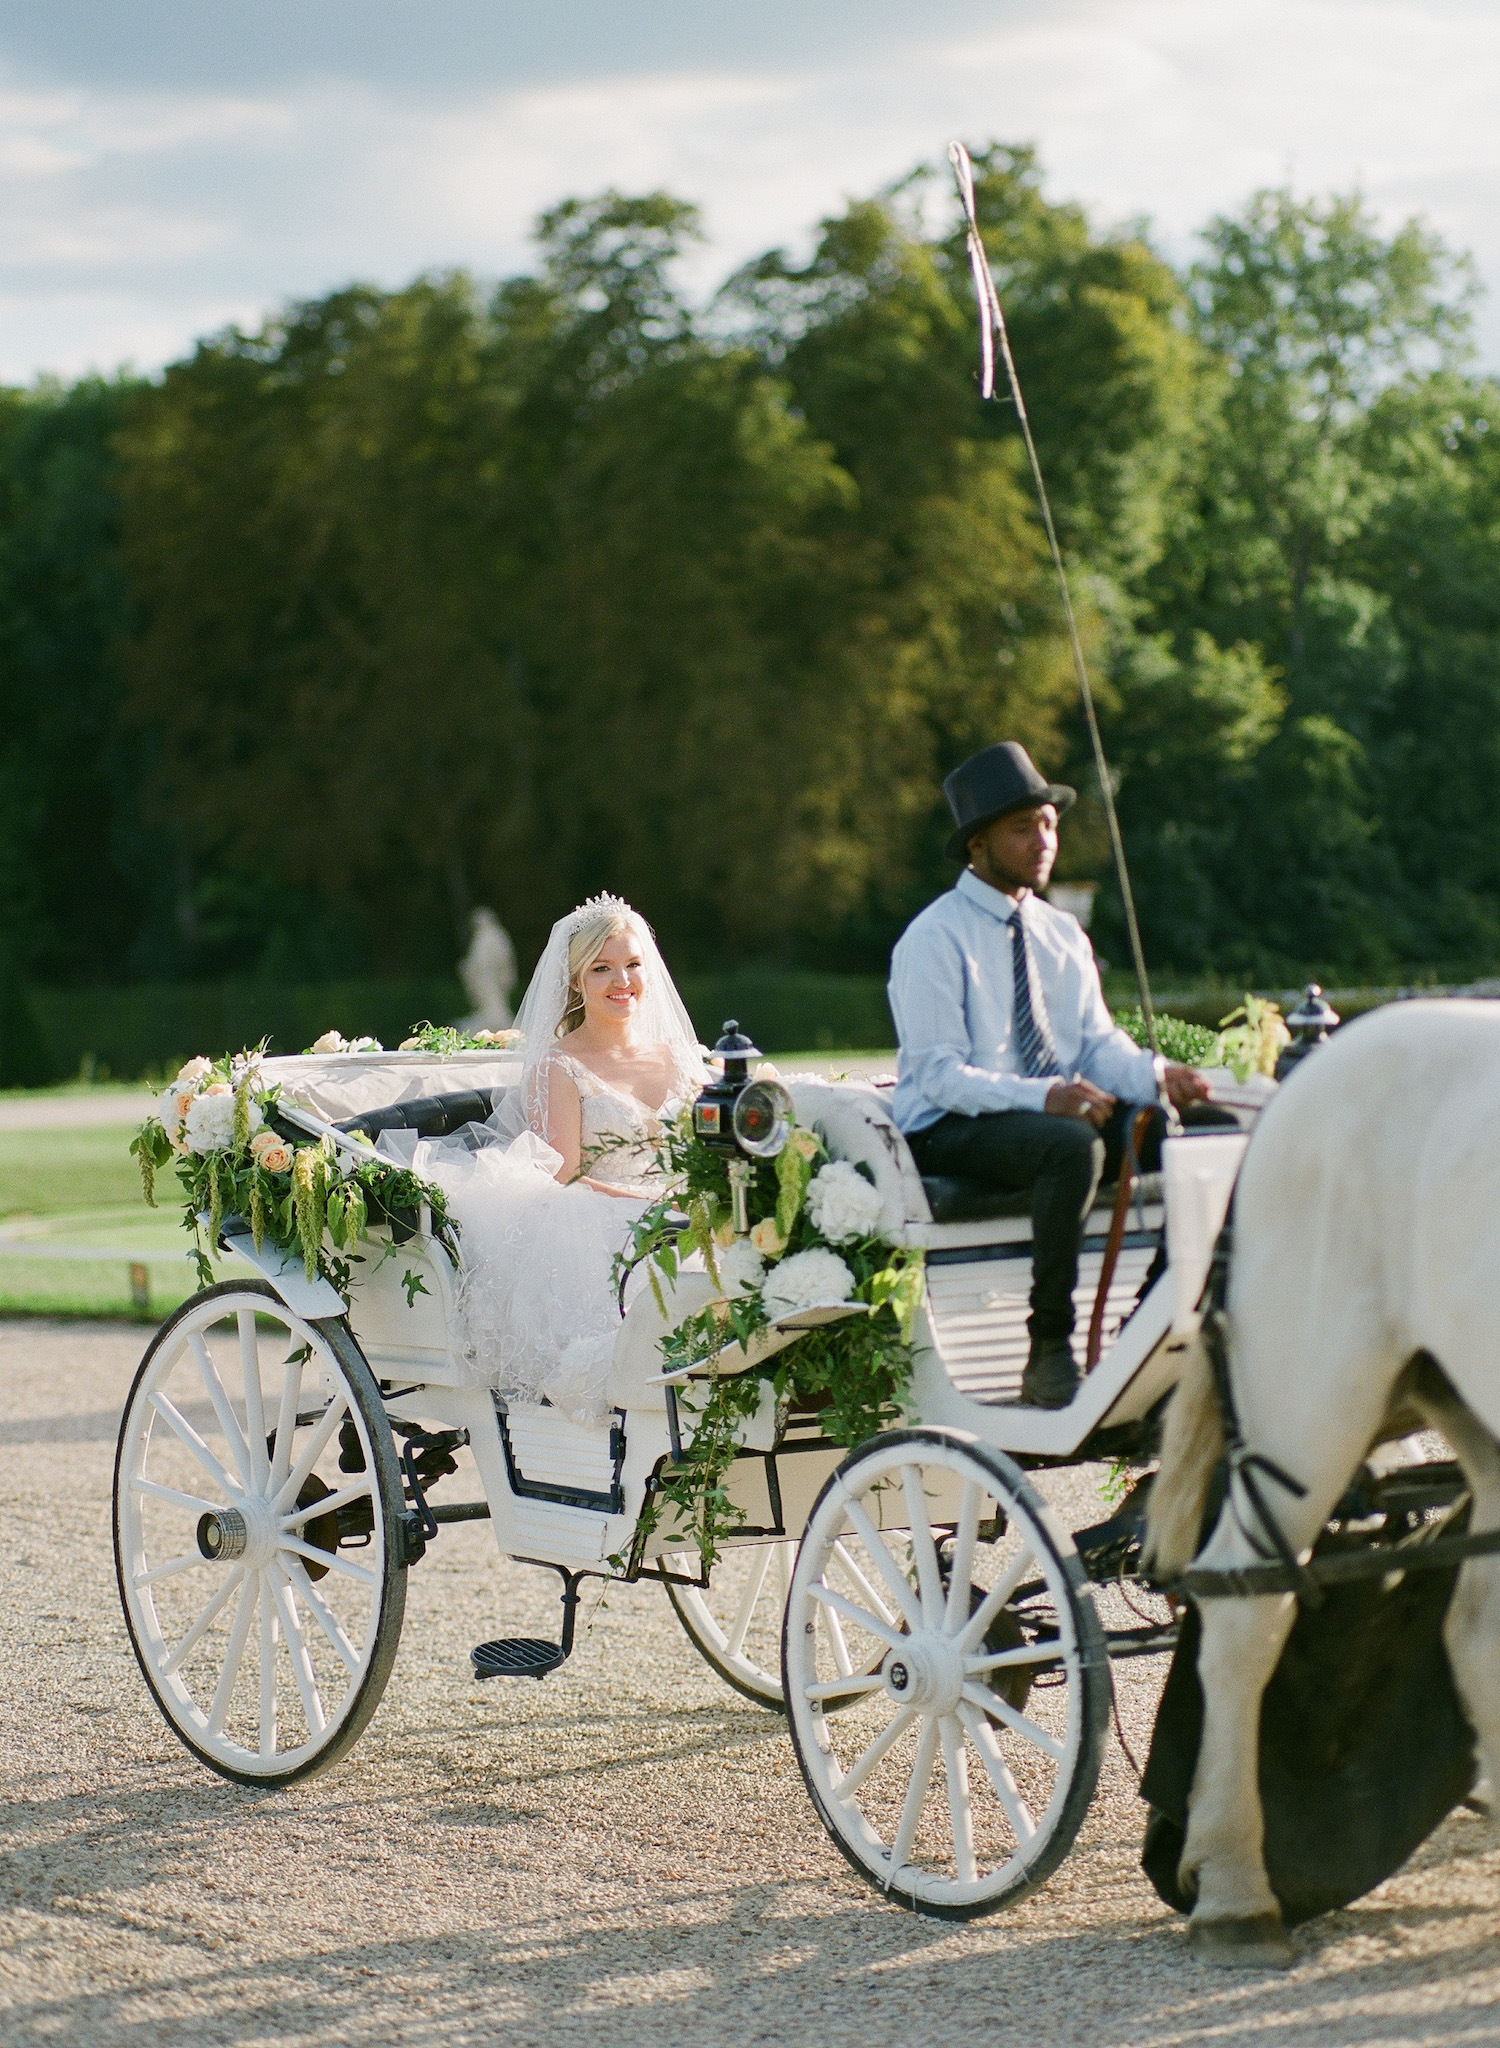 bridal arrival in horse and carriage